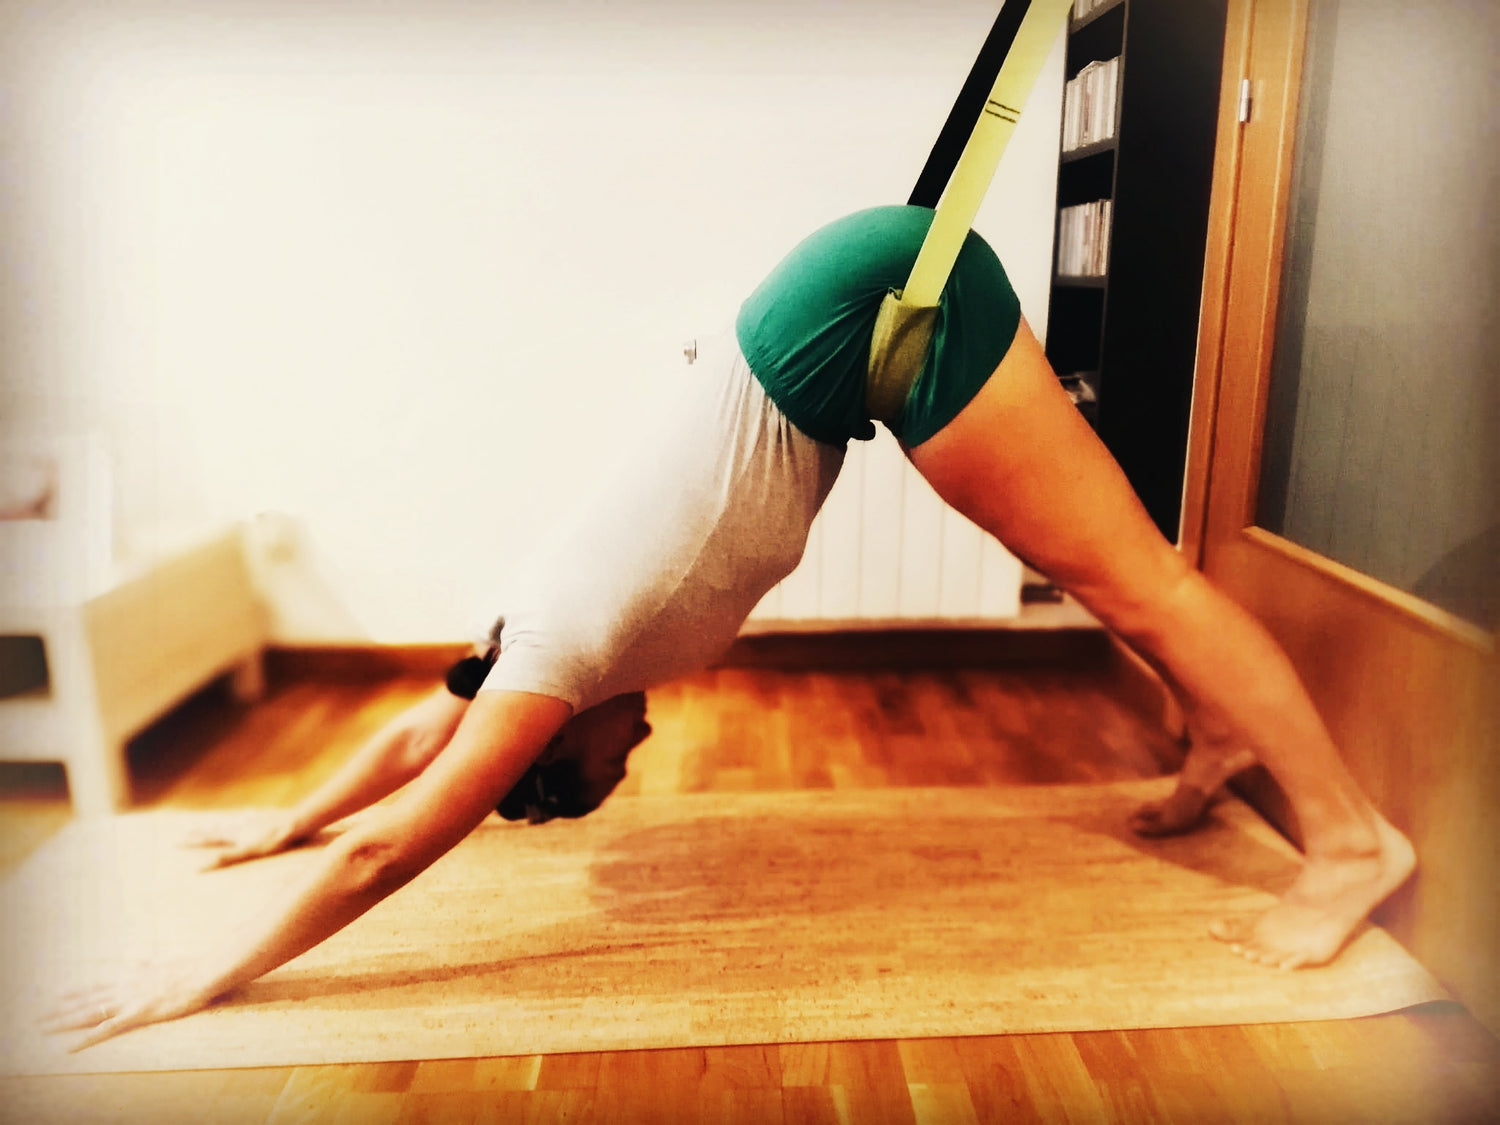 Iyengar Yoga Props: Essential Equipment for a Safe and Effective Practice